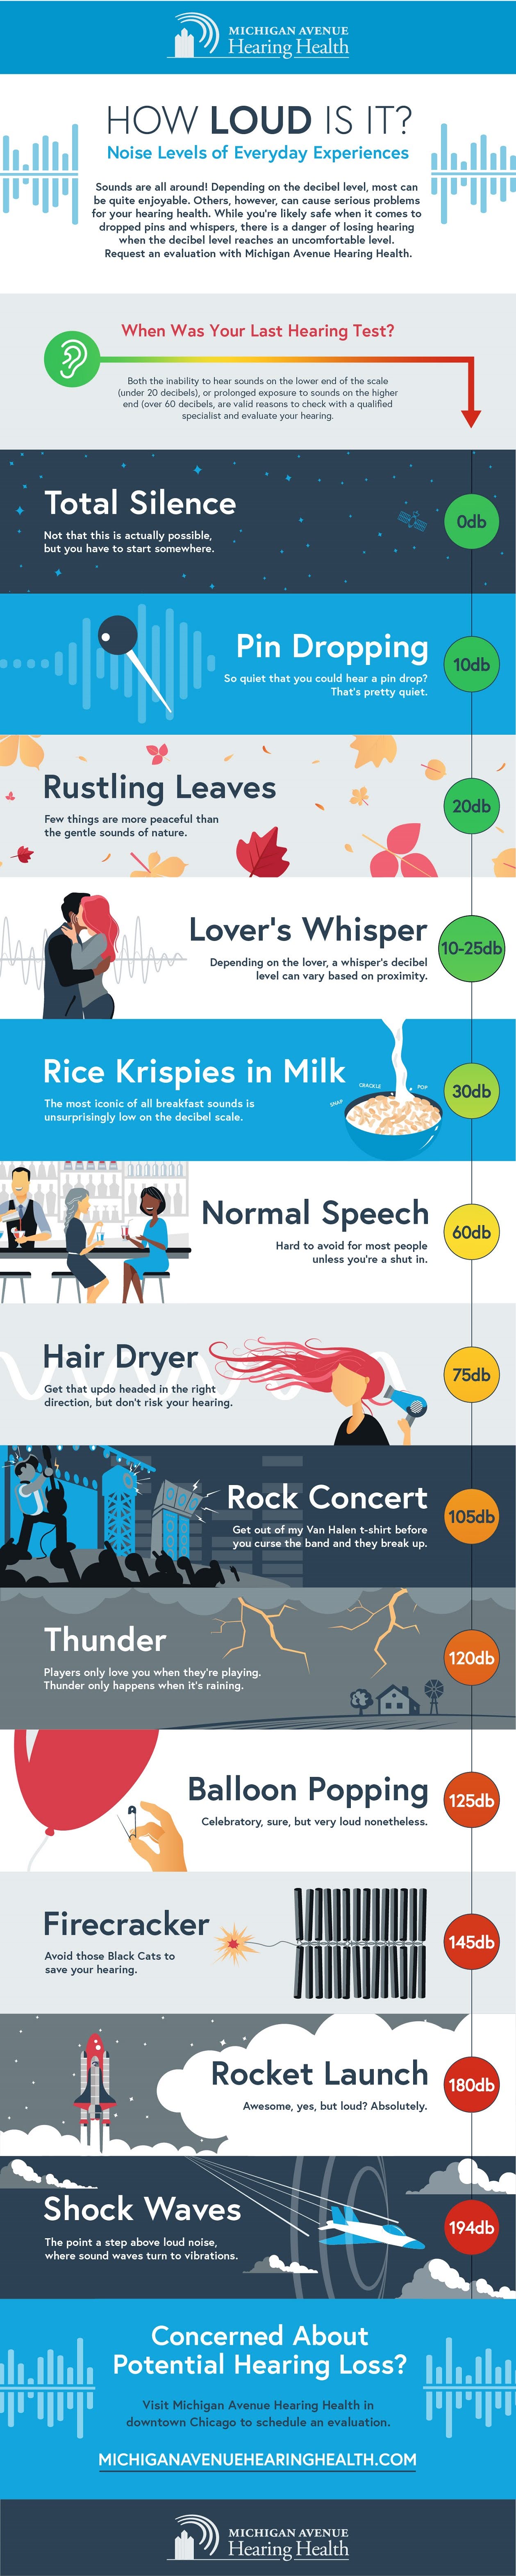 How Loud Is It? #infographic